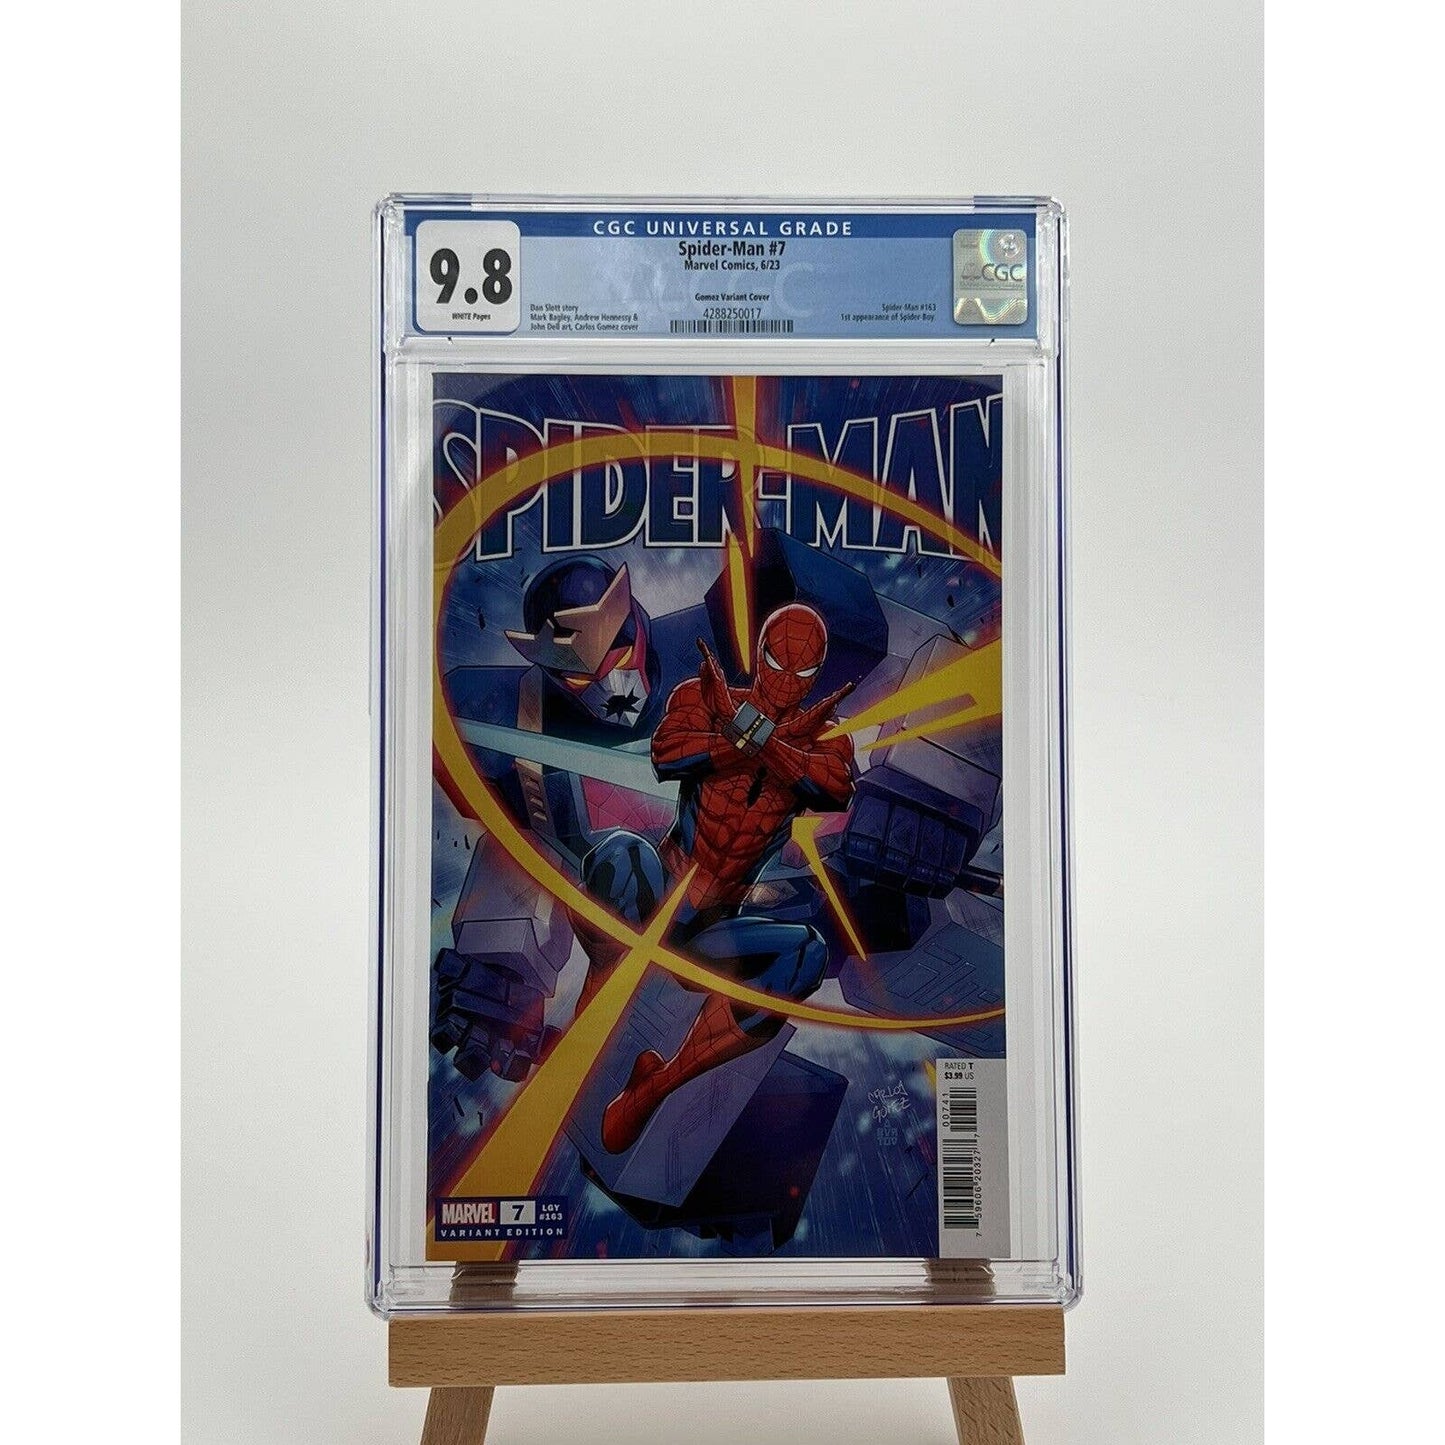 Marvel Comics SPIDERMAN #7 CGC 9.8 GOMEZ VARIANT FIRST APPEARANCE OF SPIDERBOY